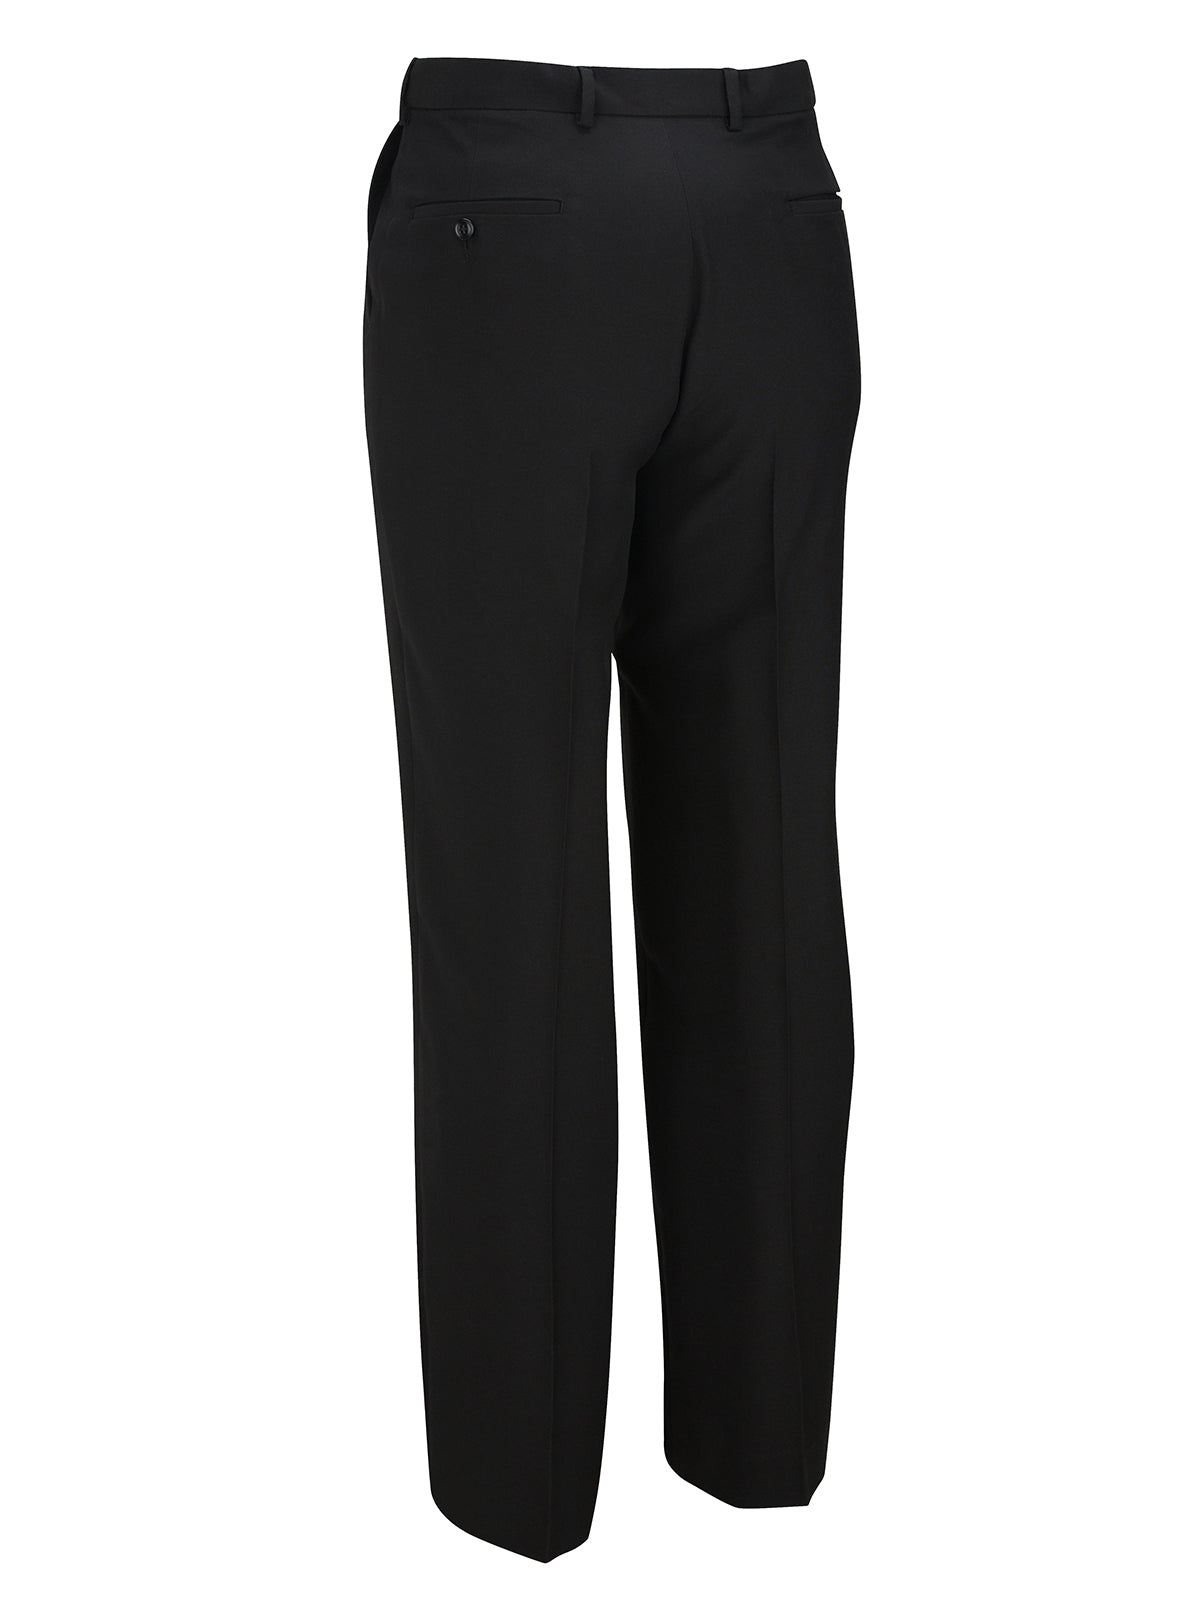 Men's Easy Fit Pant (Sizes: 58 x 31 to 60 x UR)